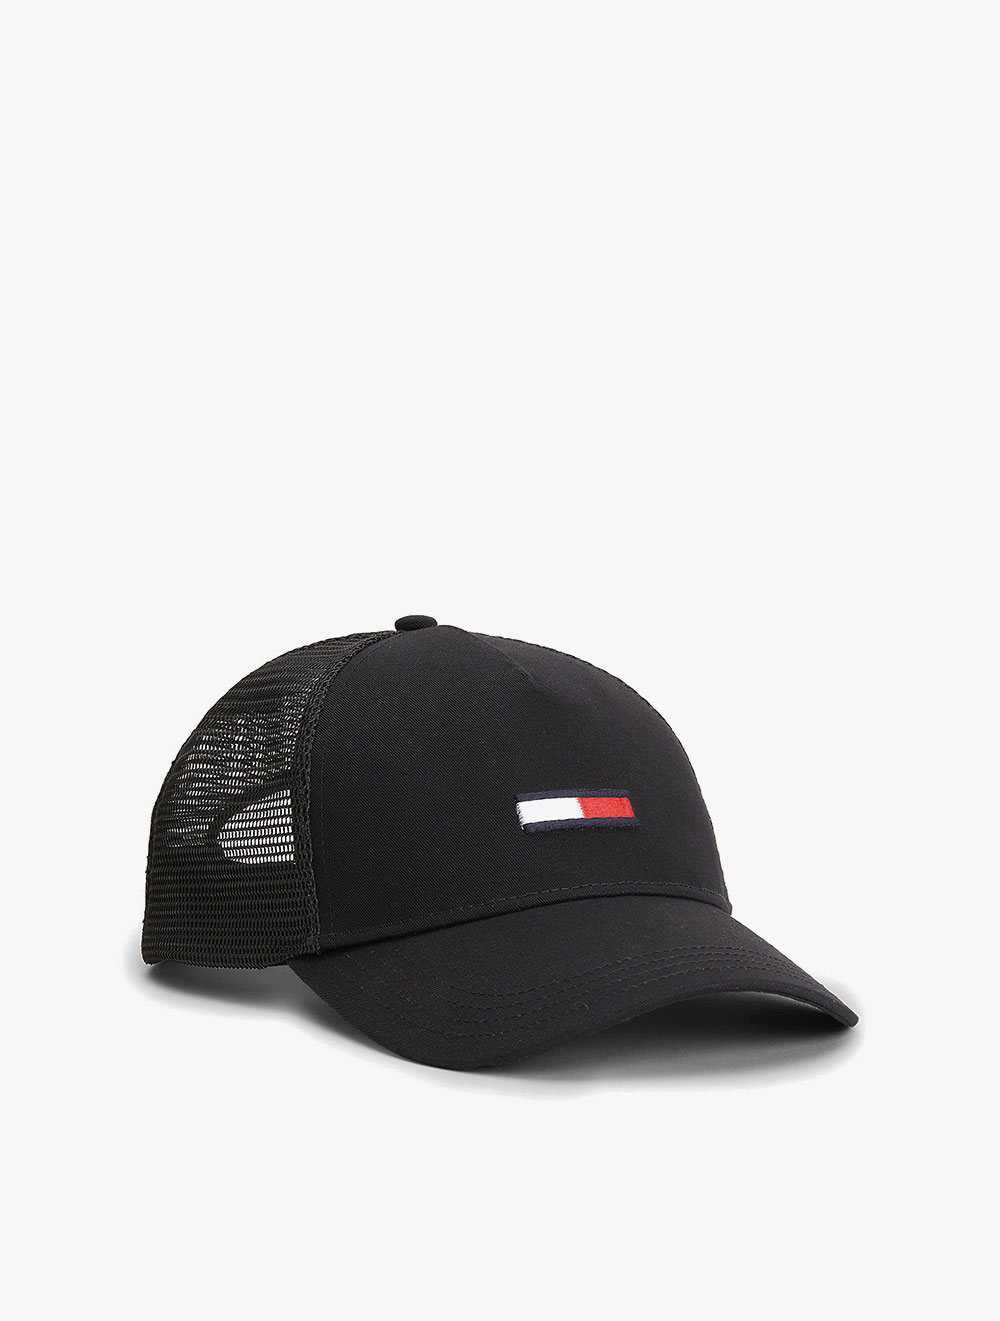 BACK Jeans MESH FLAG - CAP TRUCKER Tommy EMBROIDERY